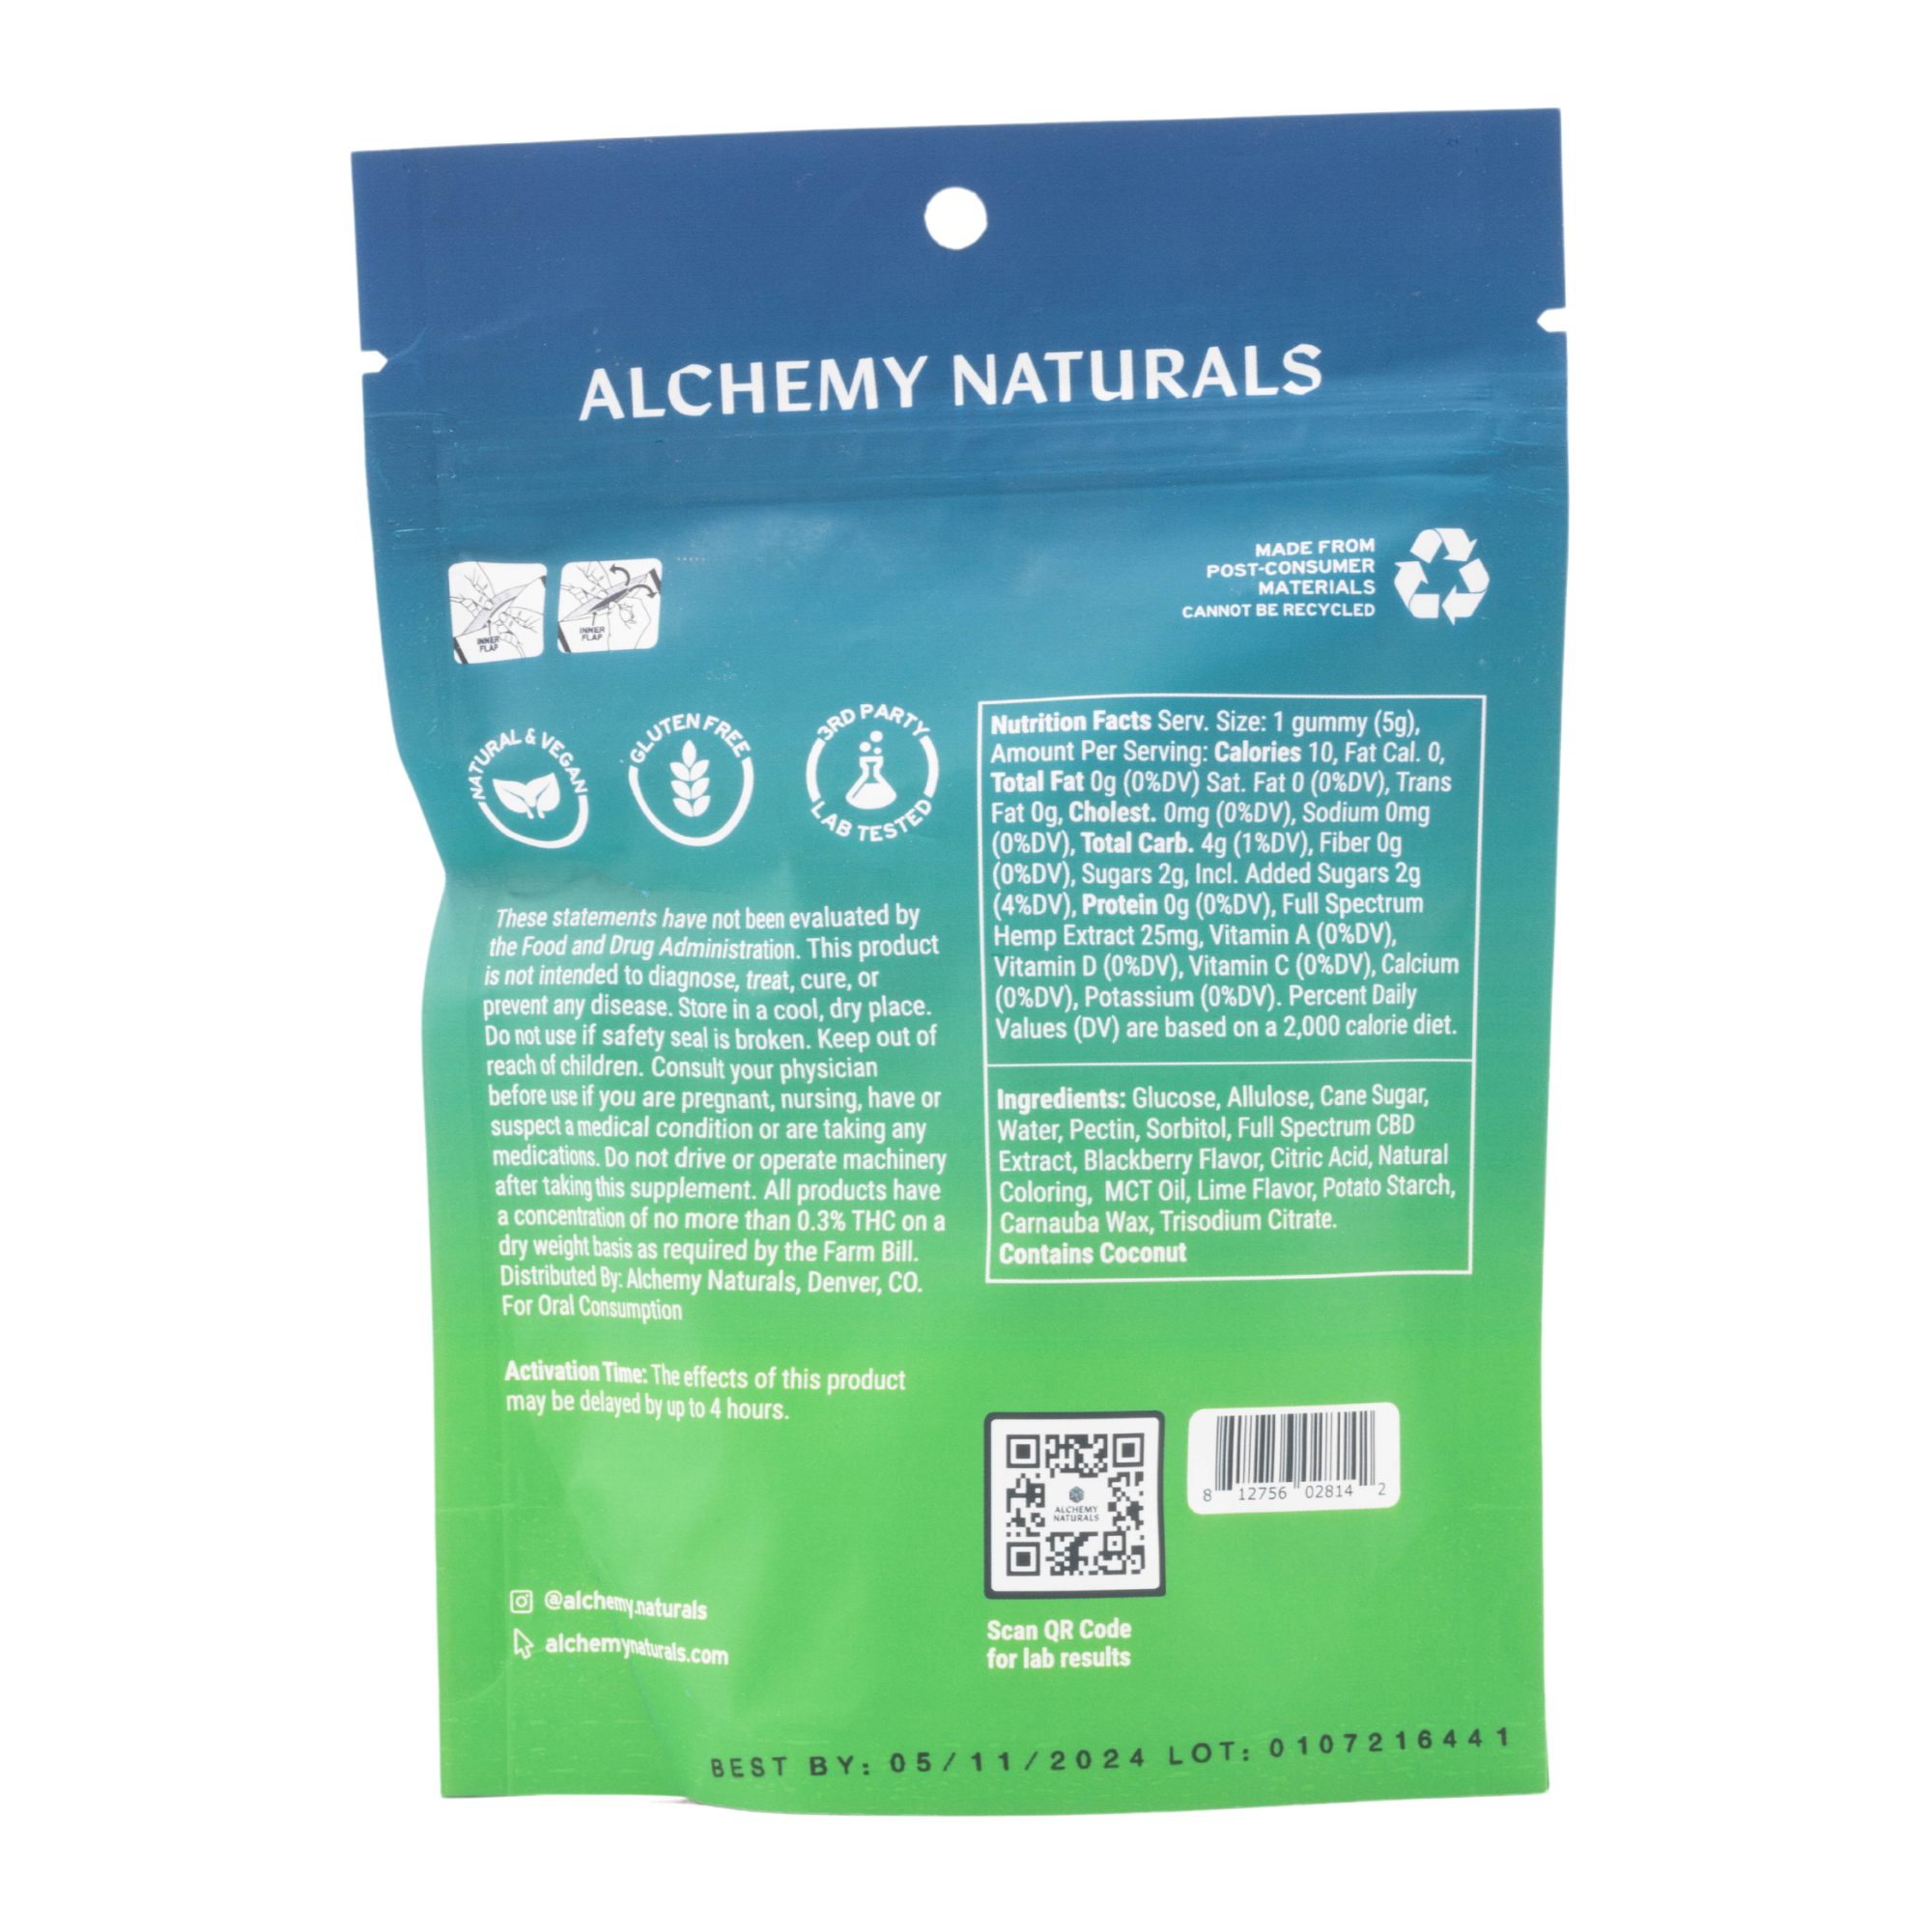 Alchemy Naturals - DAILY